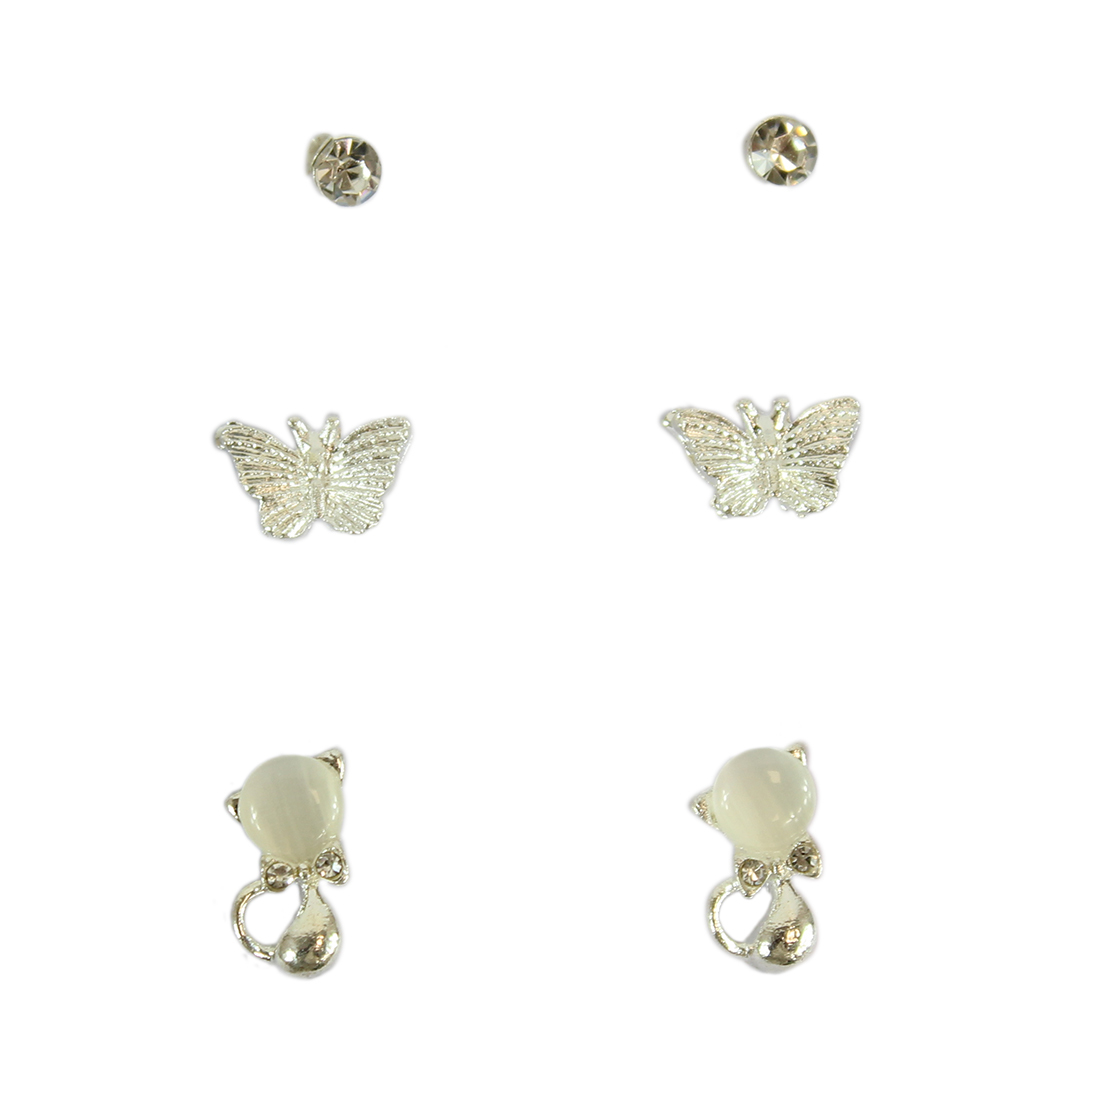 Set of three earrings with diamond and silver butterfly